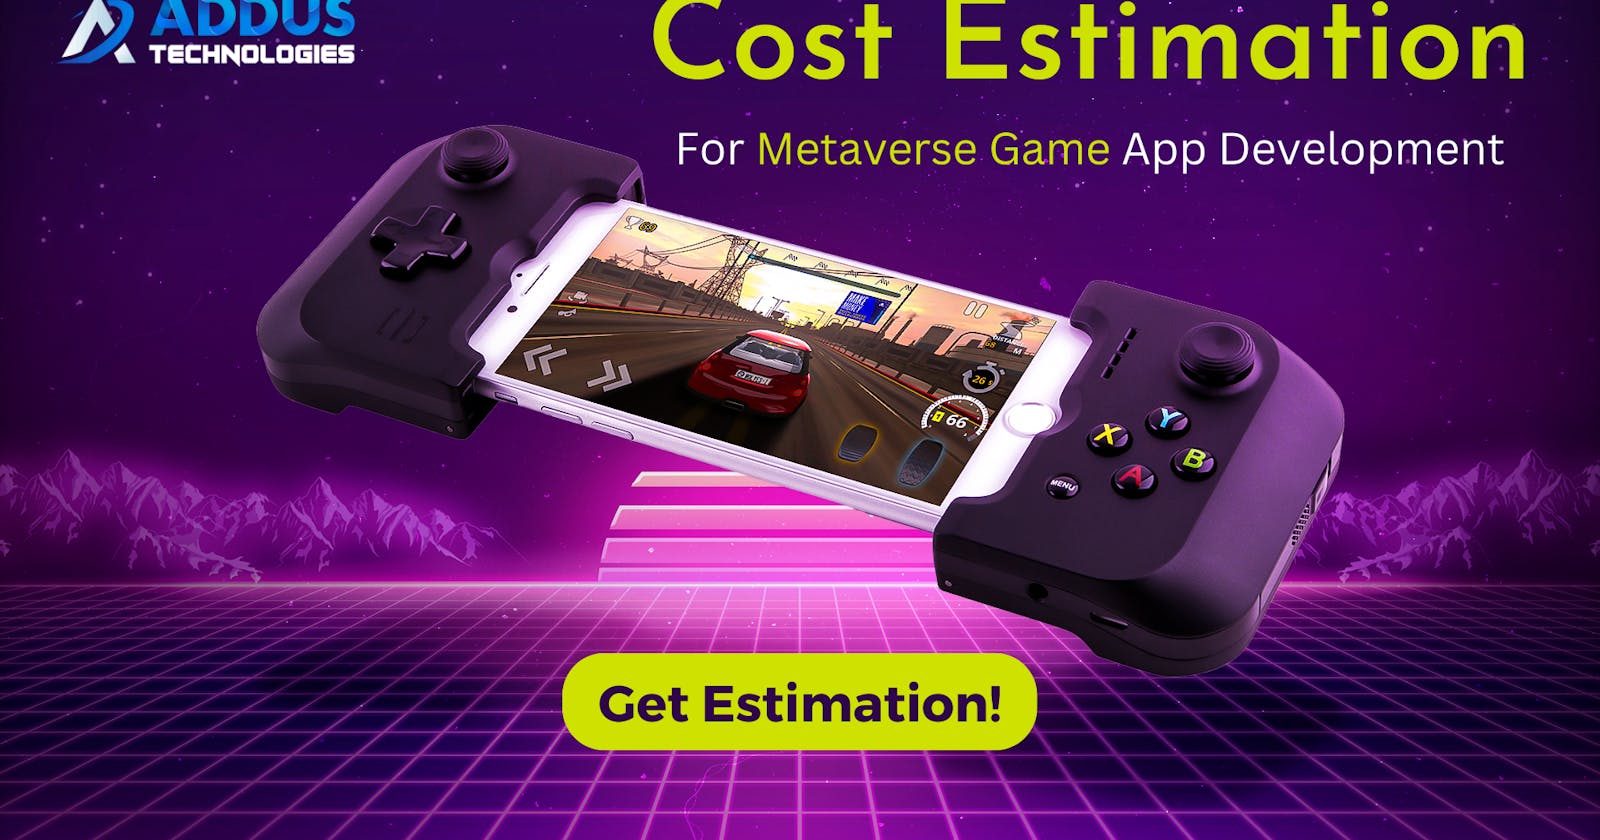 Get Cost Estimation for Metaverse Game App